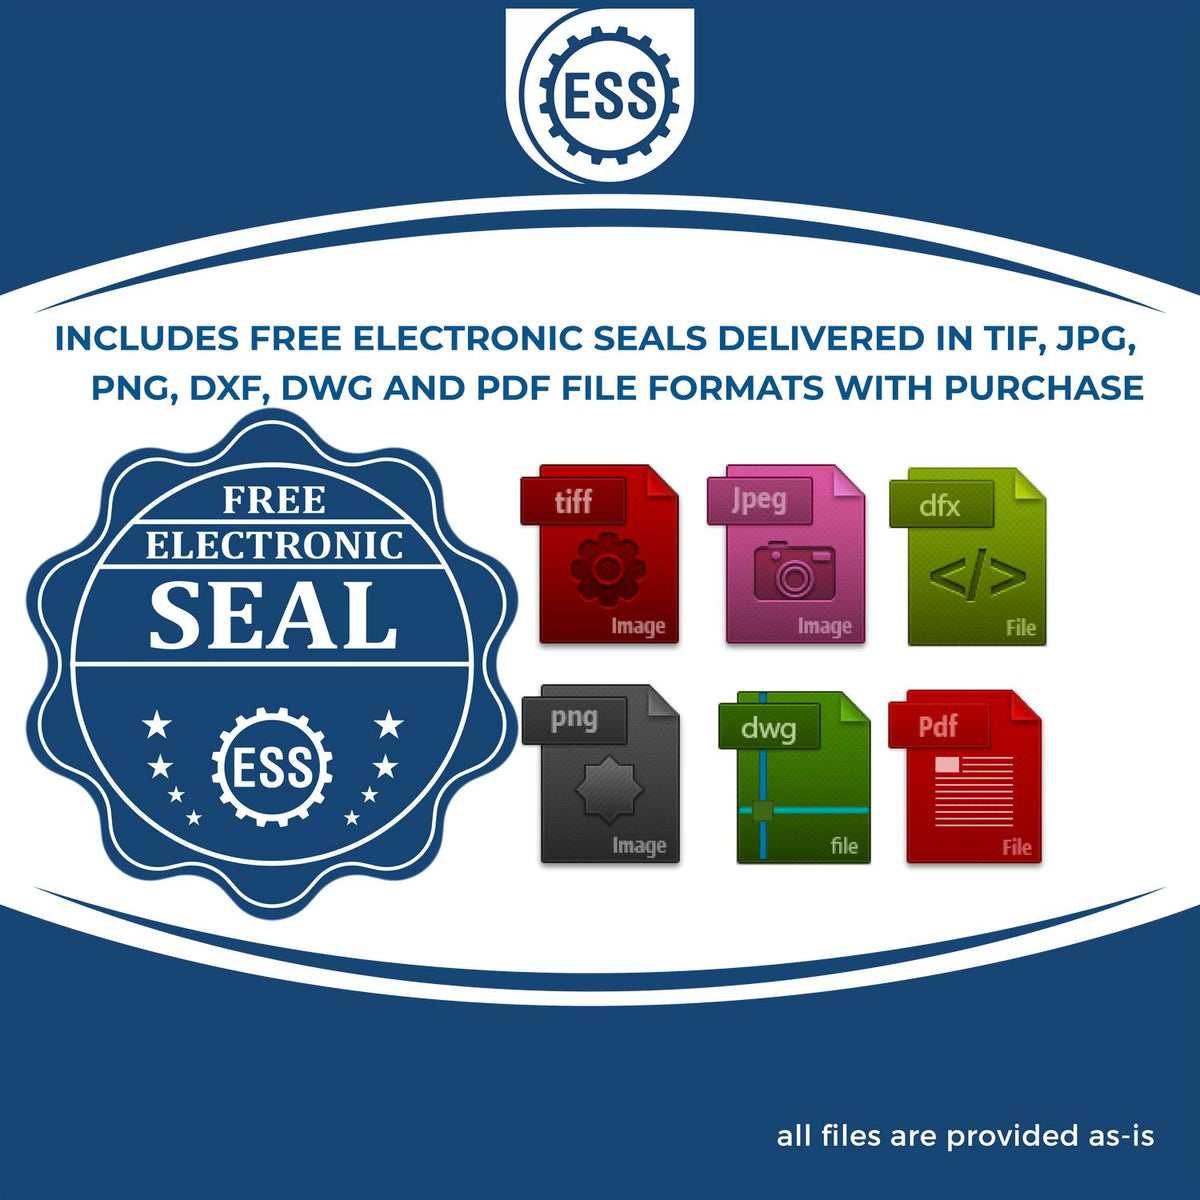 An infographic for the free electronic seal for the Soft Virginia Professional Engineer Seal illustrating the different file type icons such as DXF, DWG, TIF, JPG and PNG.